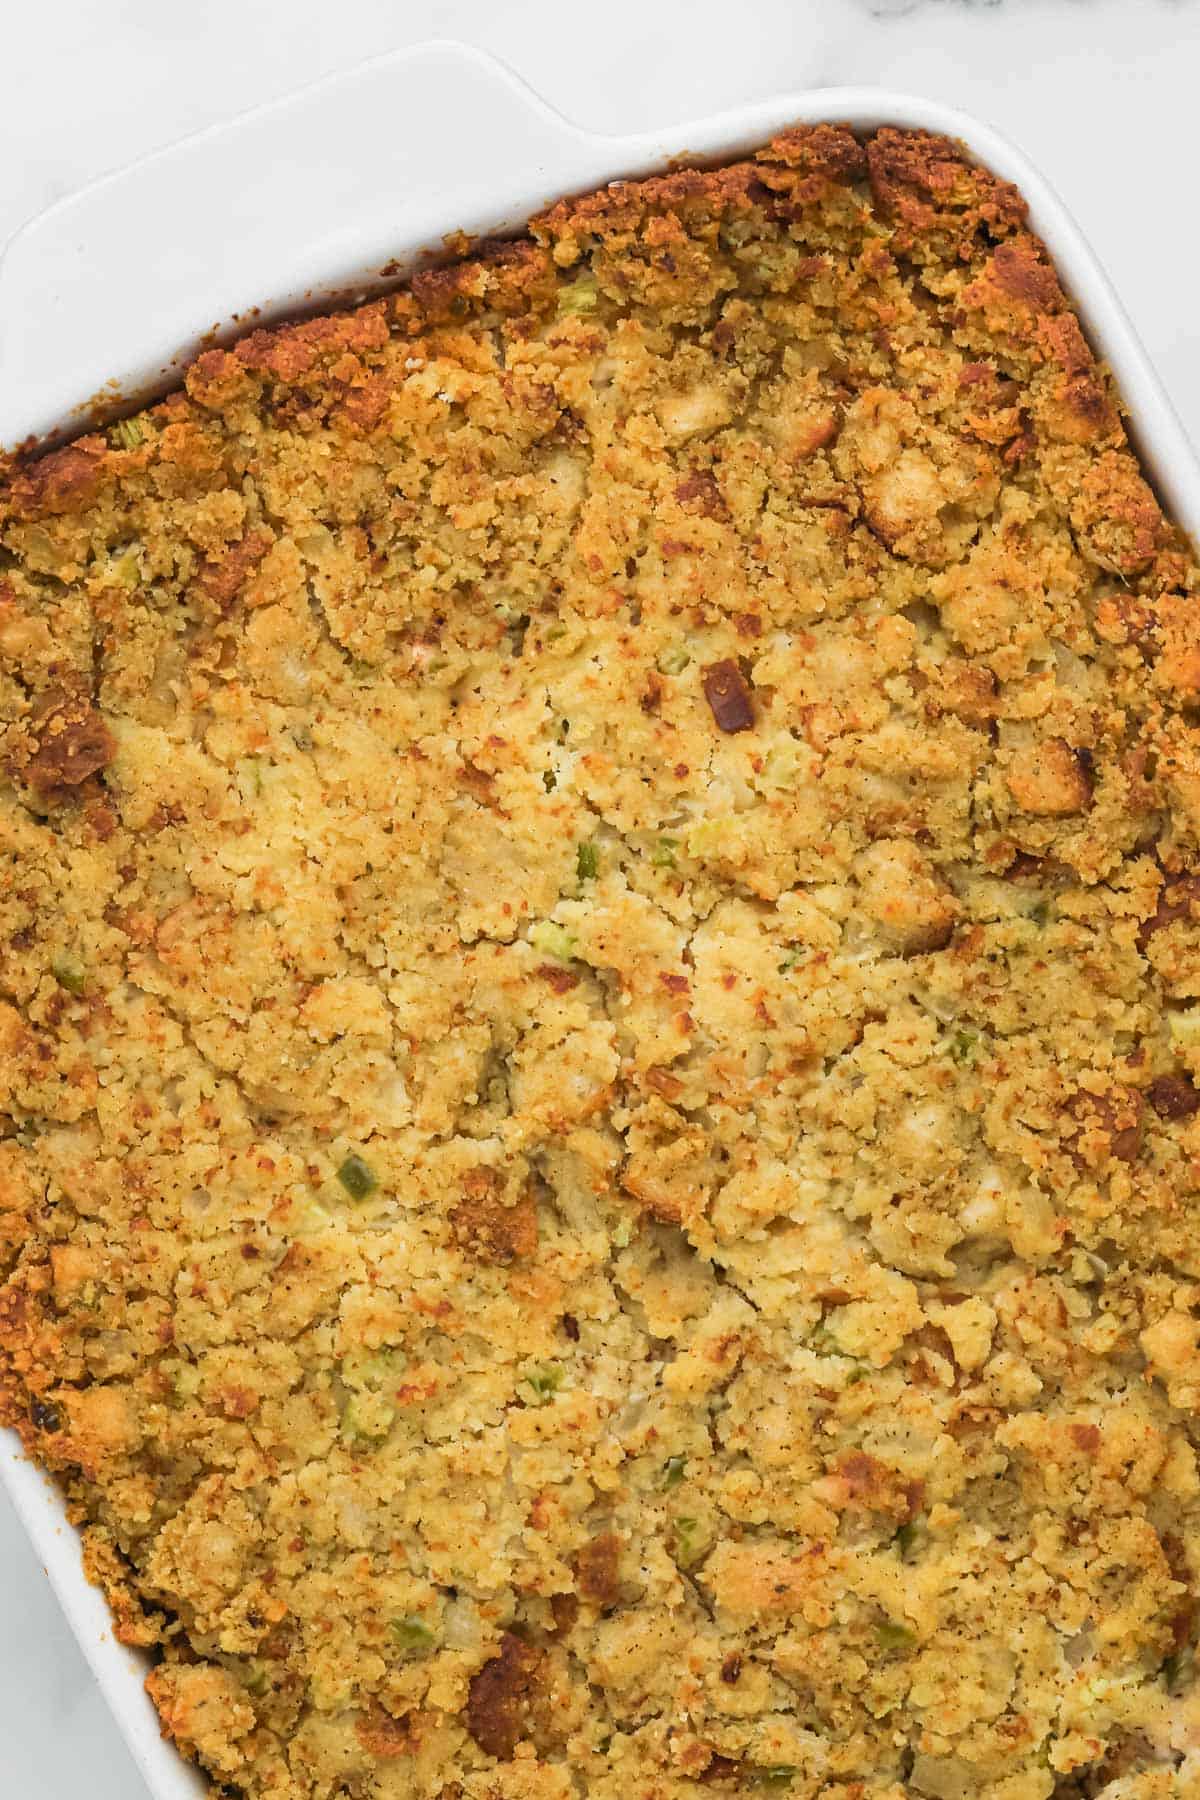 Cornbread dressing after baking in the oven.